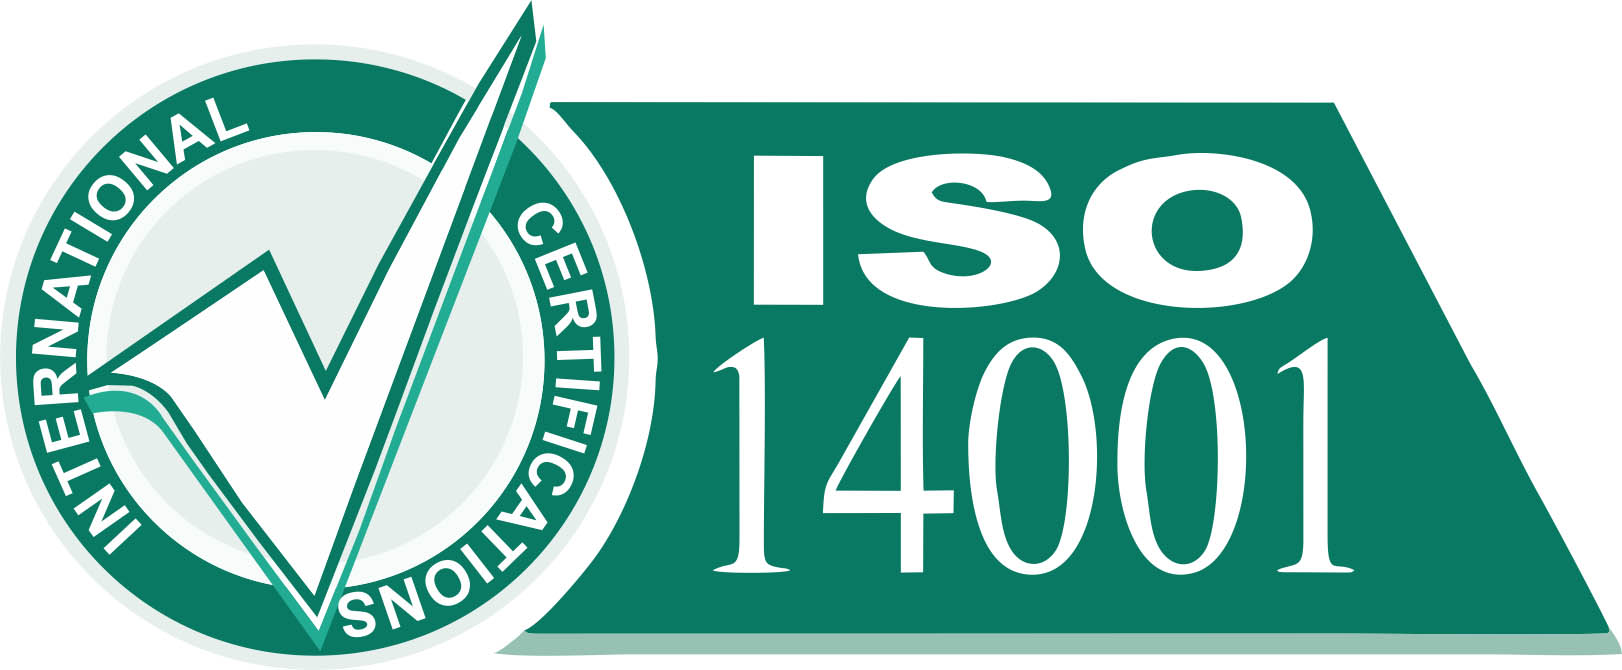 mipro iso 14001 1